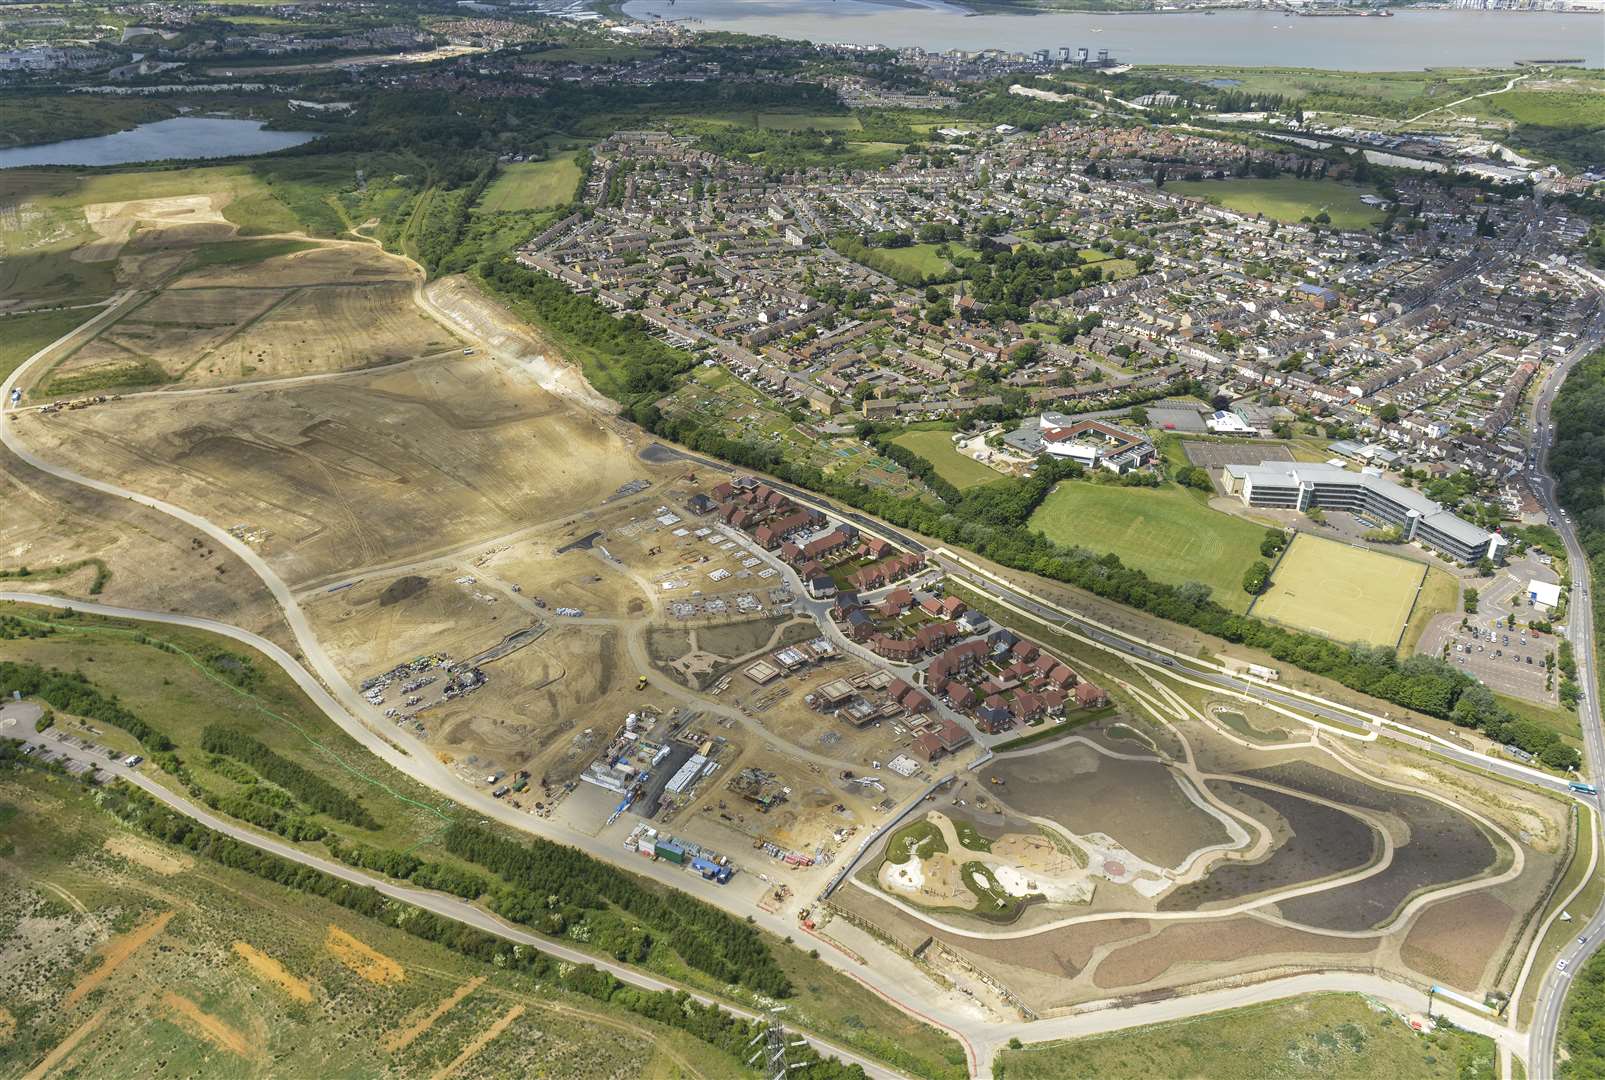 The Eastern Quarry at Ebbsfleet Garden City where many of the 15,000 planned homes are to be built